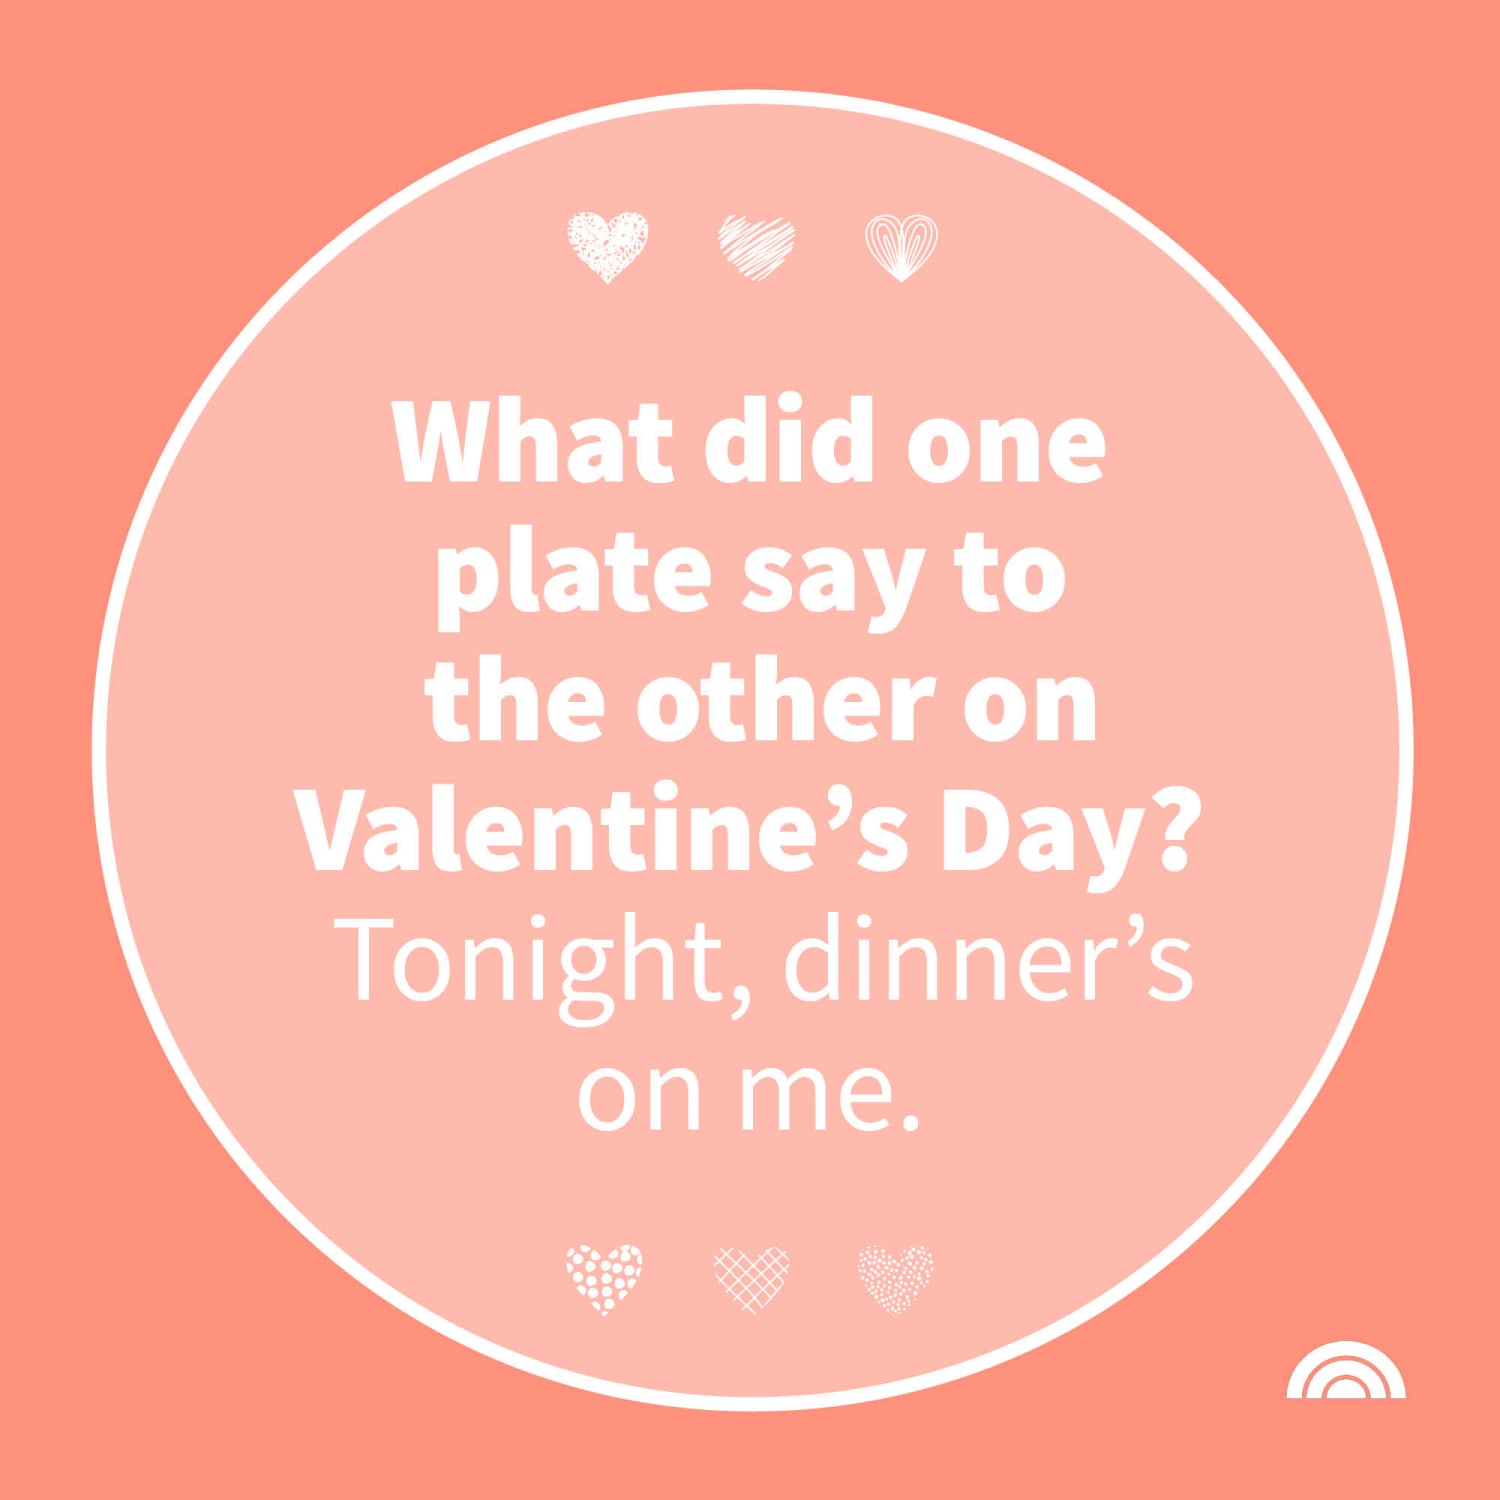 60 Funny Valentine's Day Jokes for Kids and Adults